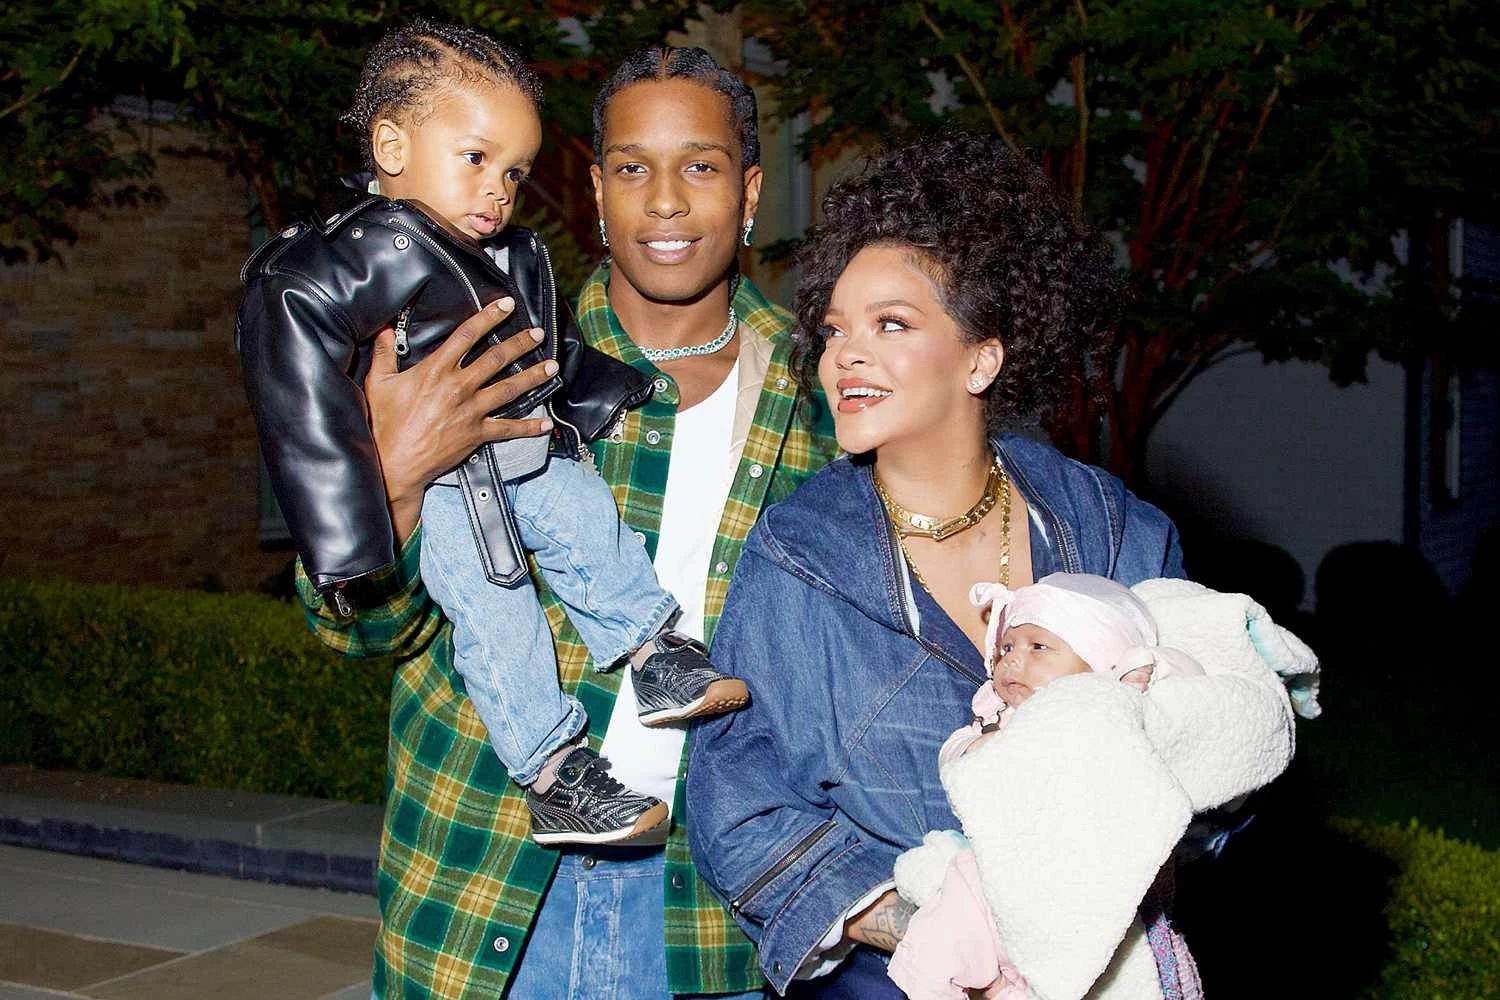 Who Is The Father Of Rihanna's Children - A$AP Rocky?